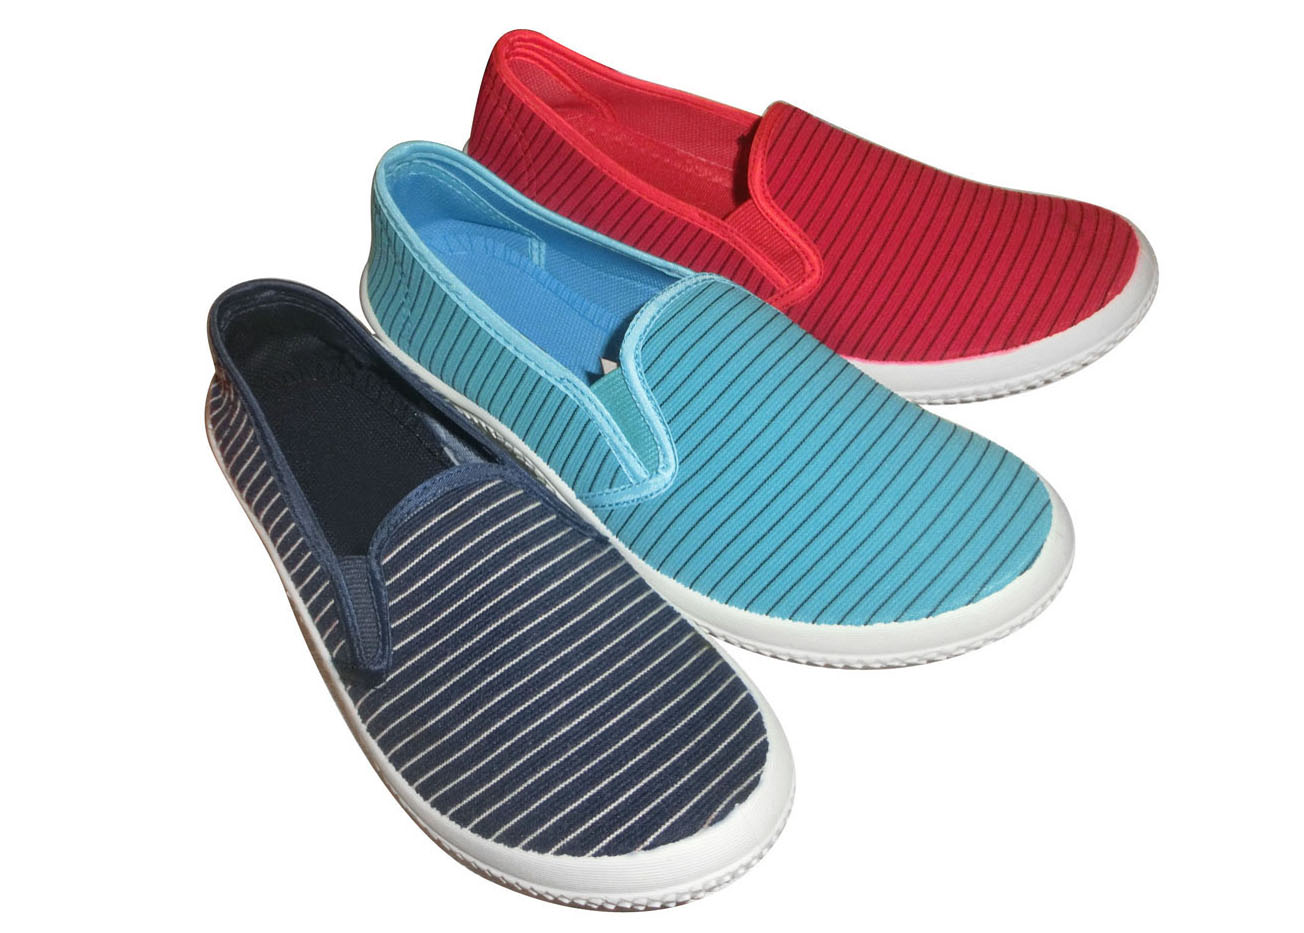 New Style Slip on Kids shoes injection shoes